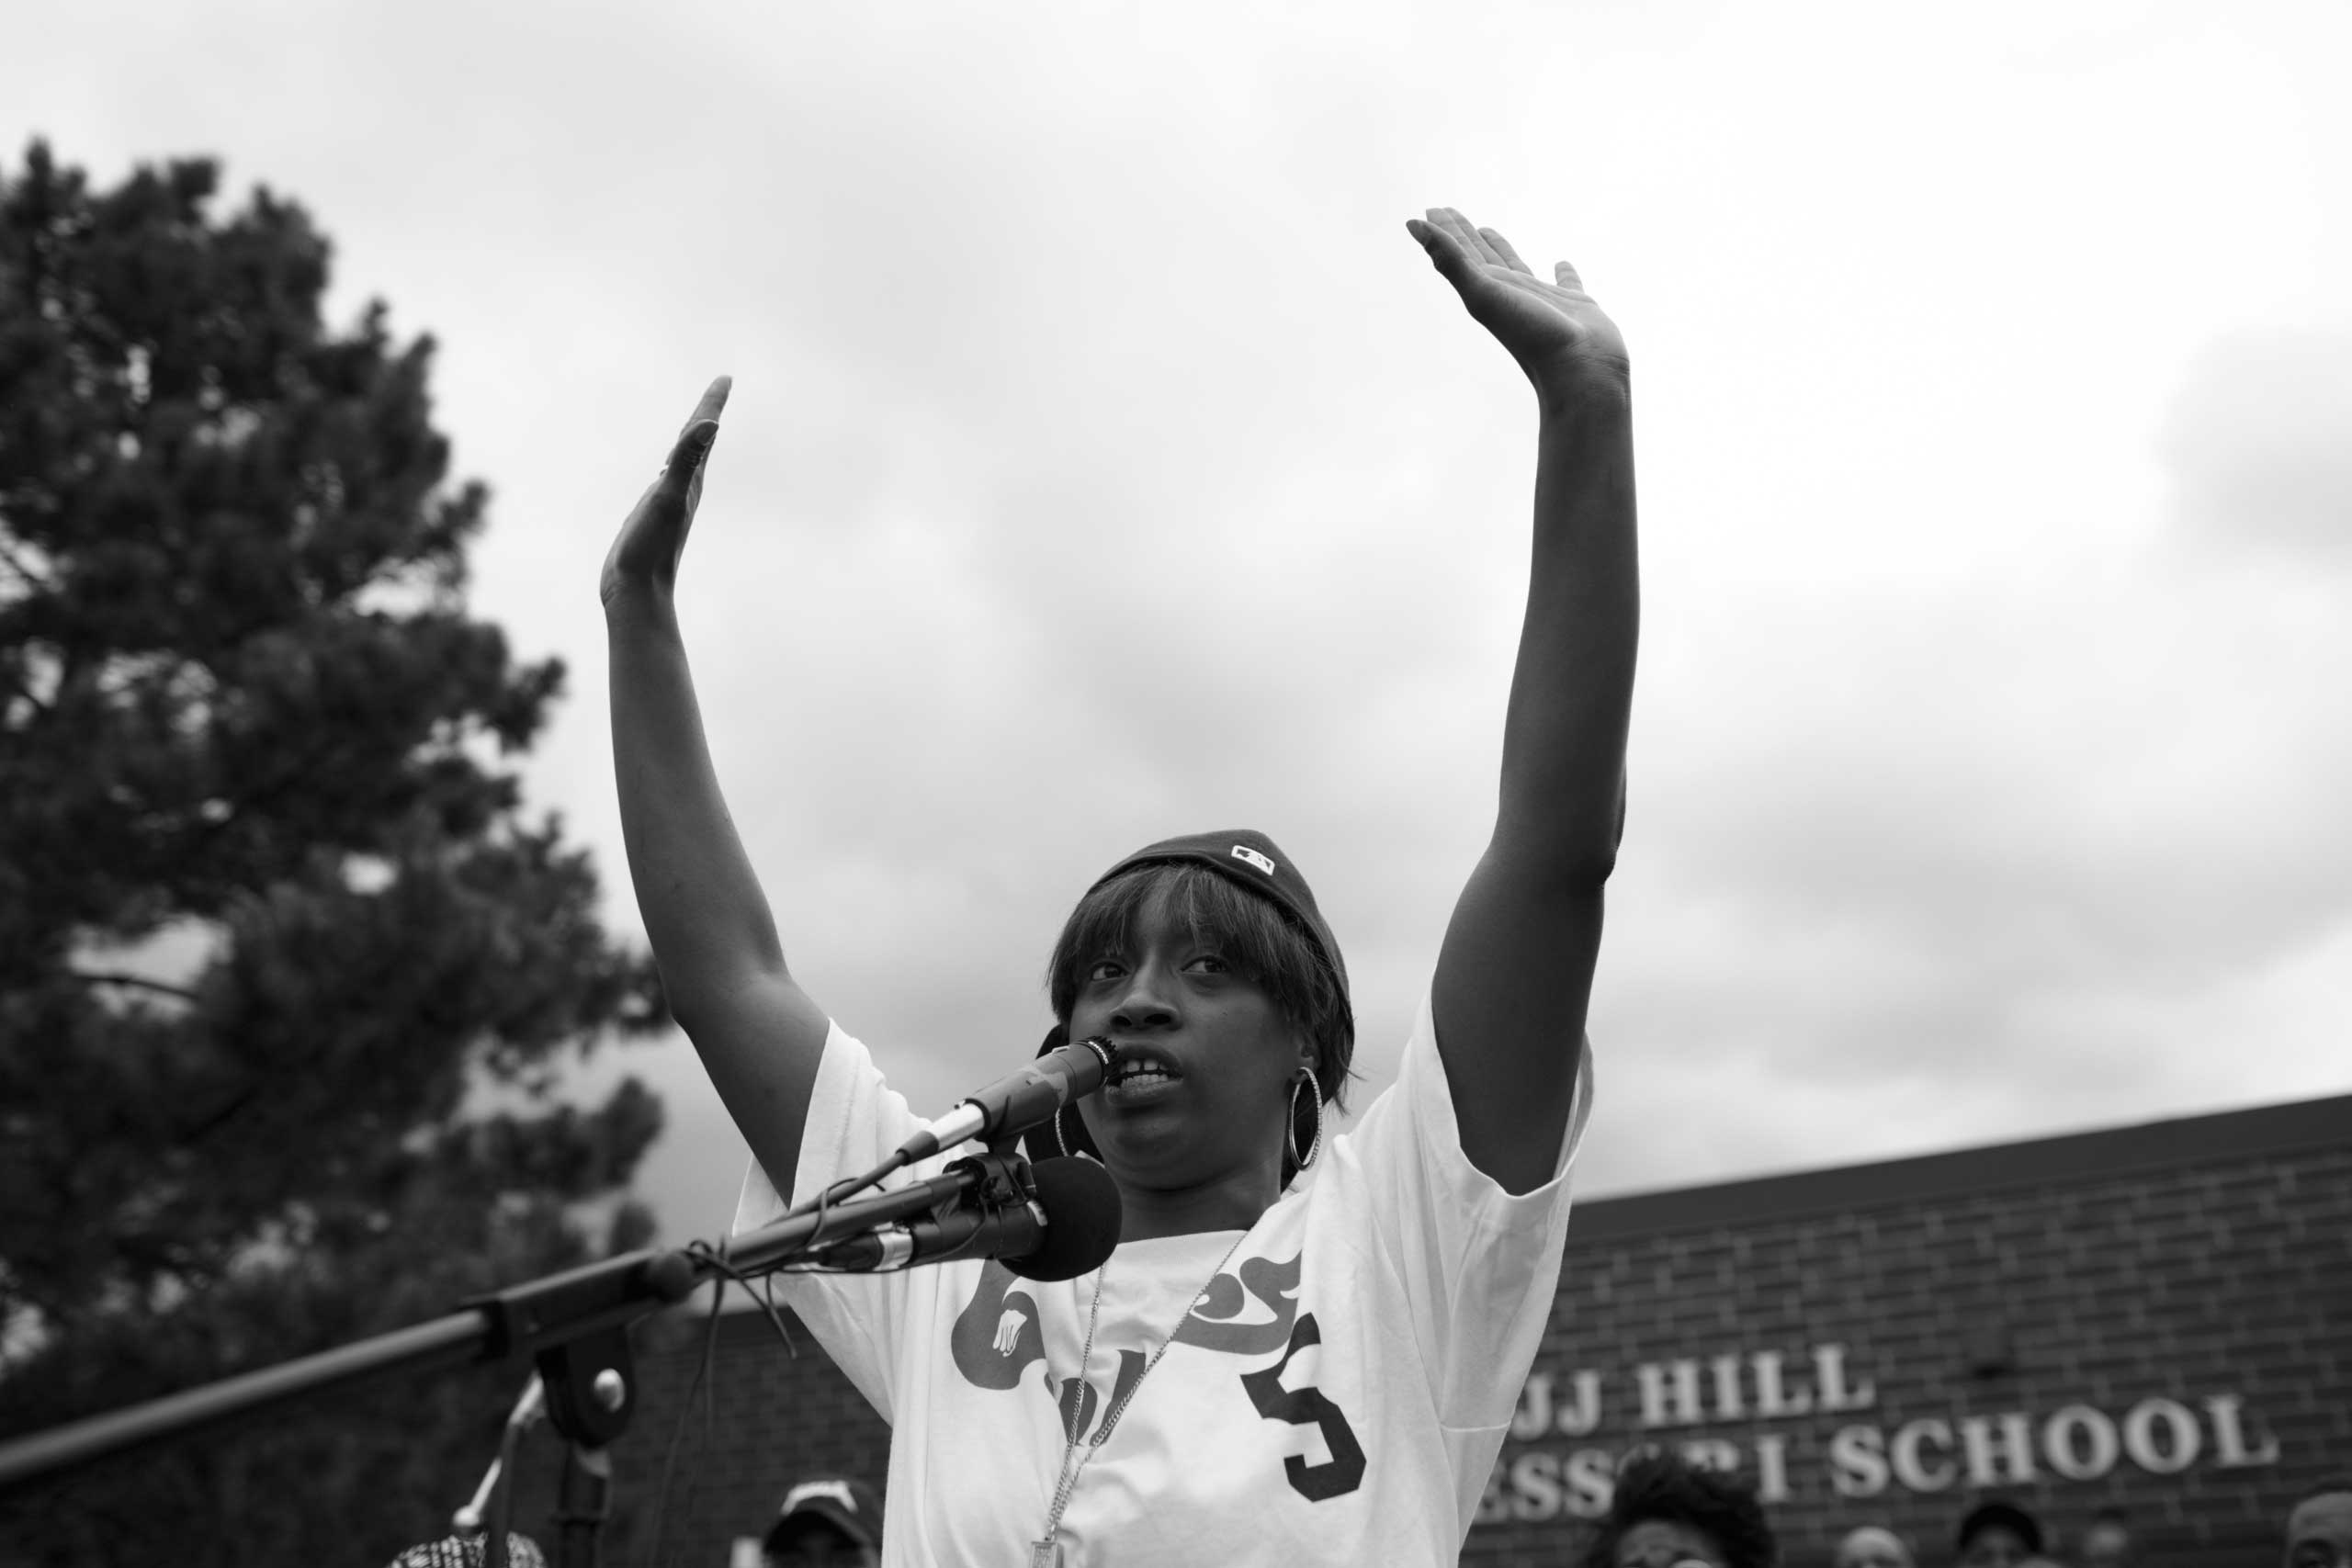 July 7, 2016 - St. Paul, Minnesota: Diamond Lavish Reynolds is holding a speech at J.J. Hill Montessori School at a vigil for Philando Castile, who was fatally shot a day before by a police officer in Falcon Heights. Reynolds was Castile's girlfriend and filmed the incident.